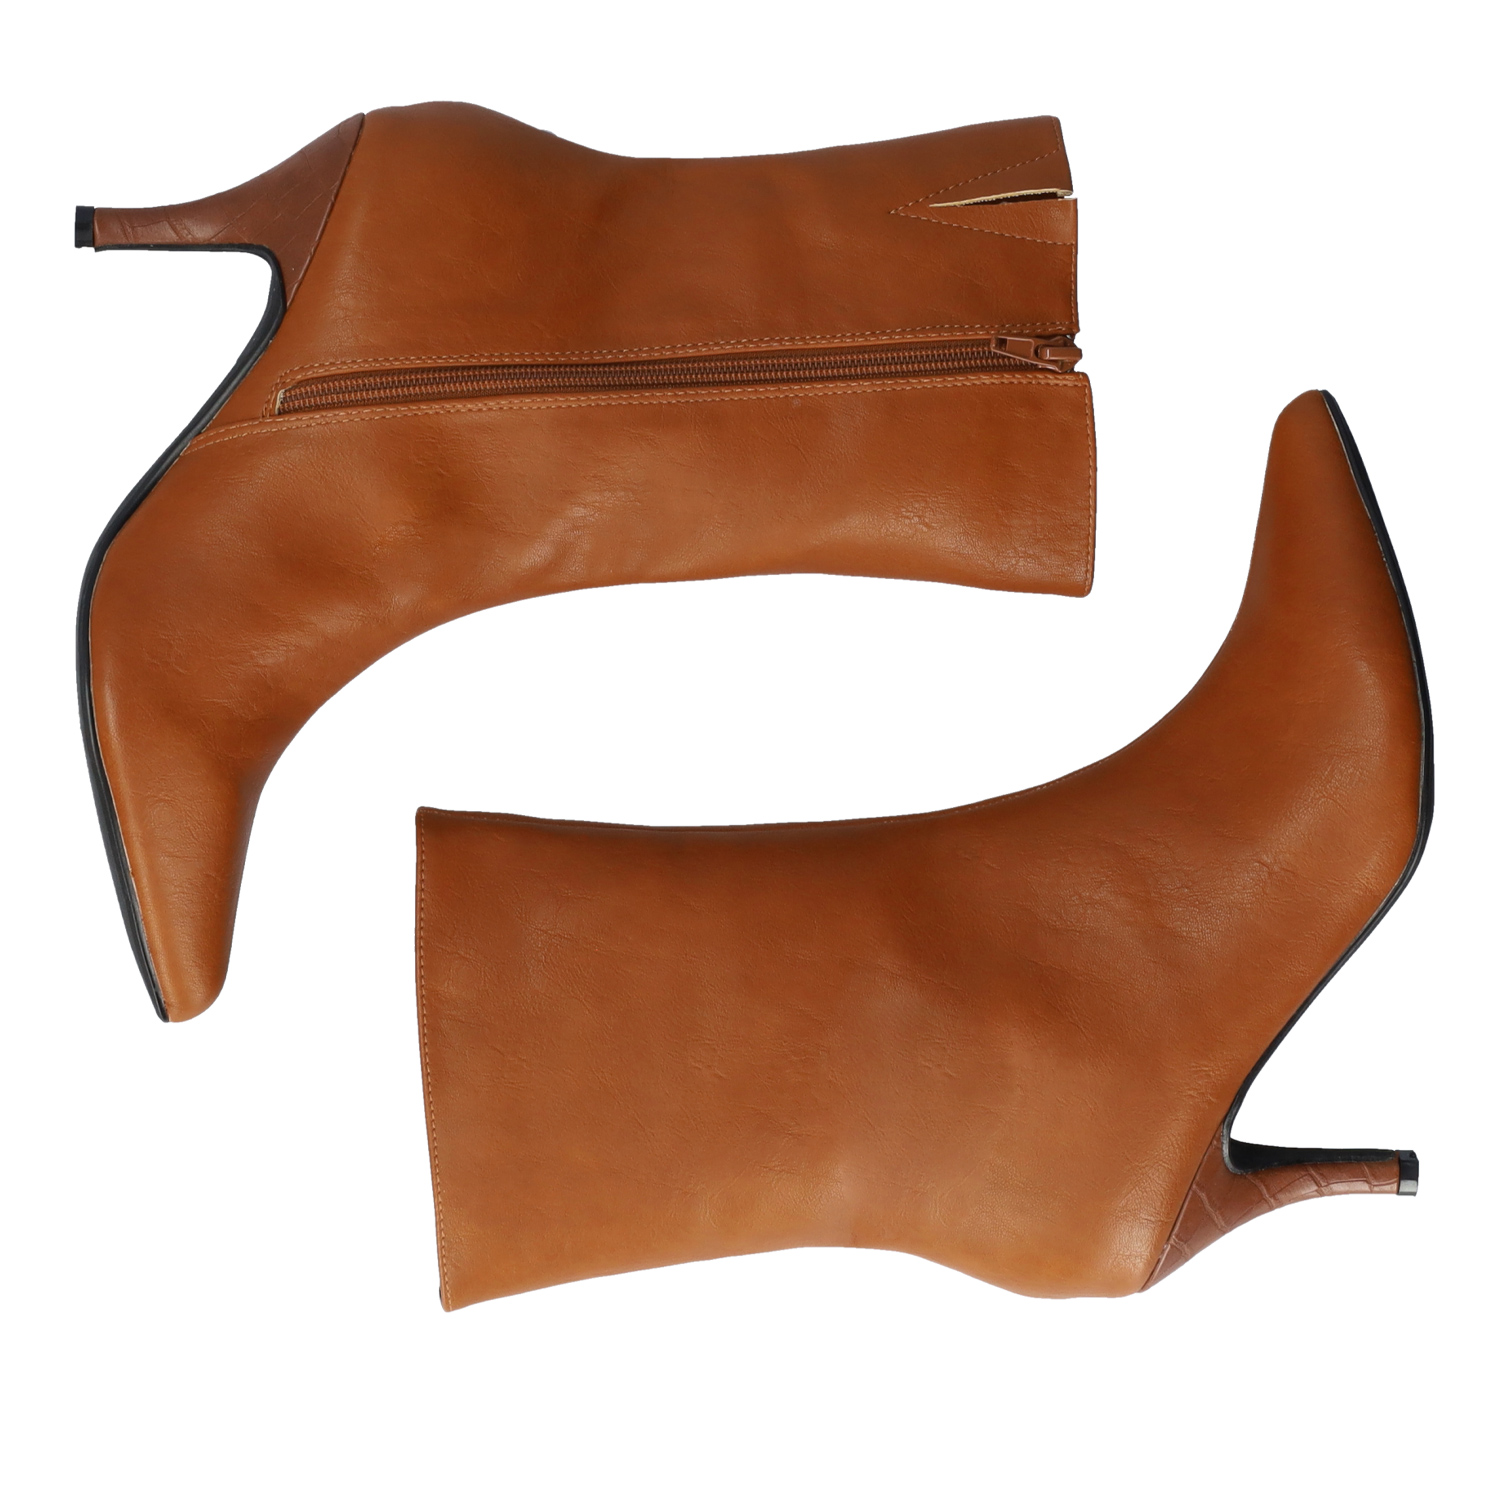 Pointed toed high-top booties in camel colored faux leather 